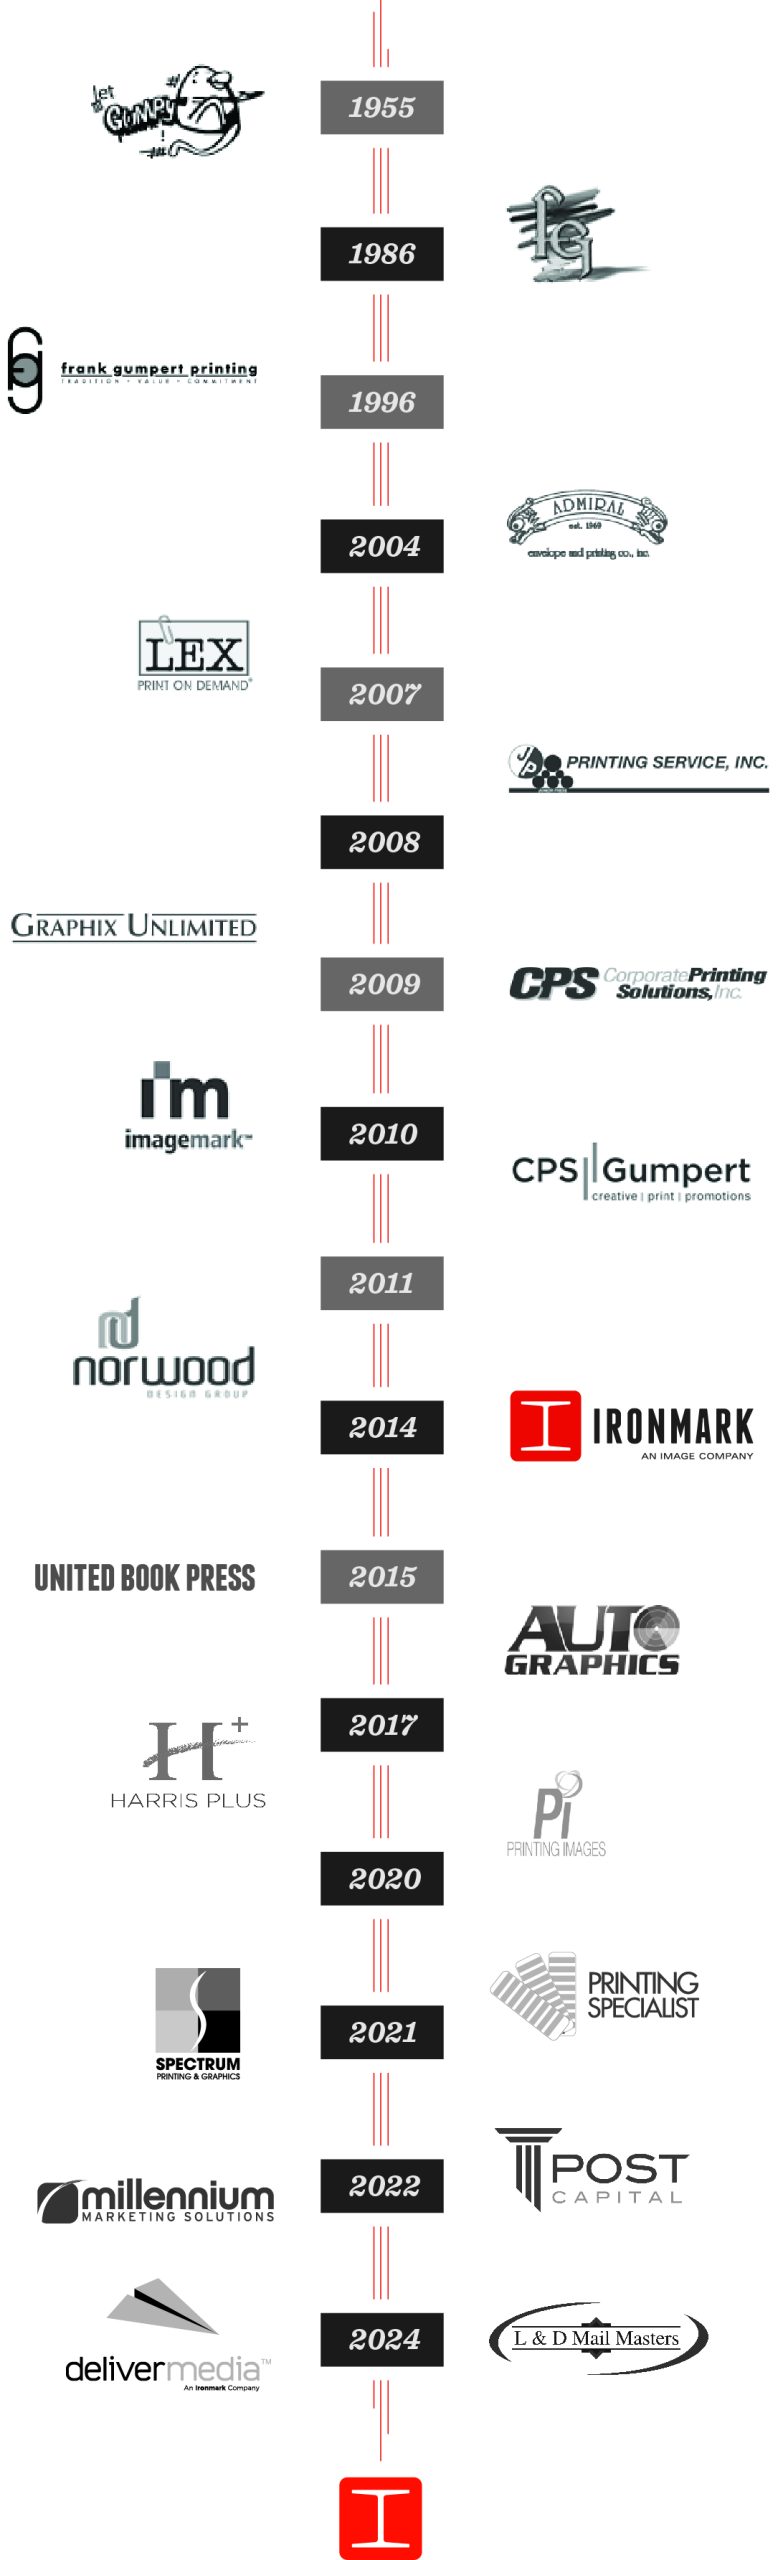 A timeline of Ironmark's history.